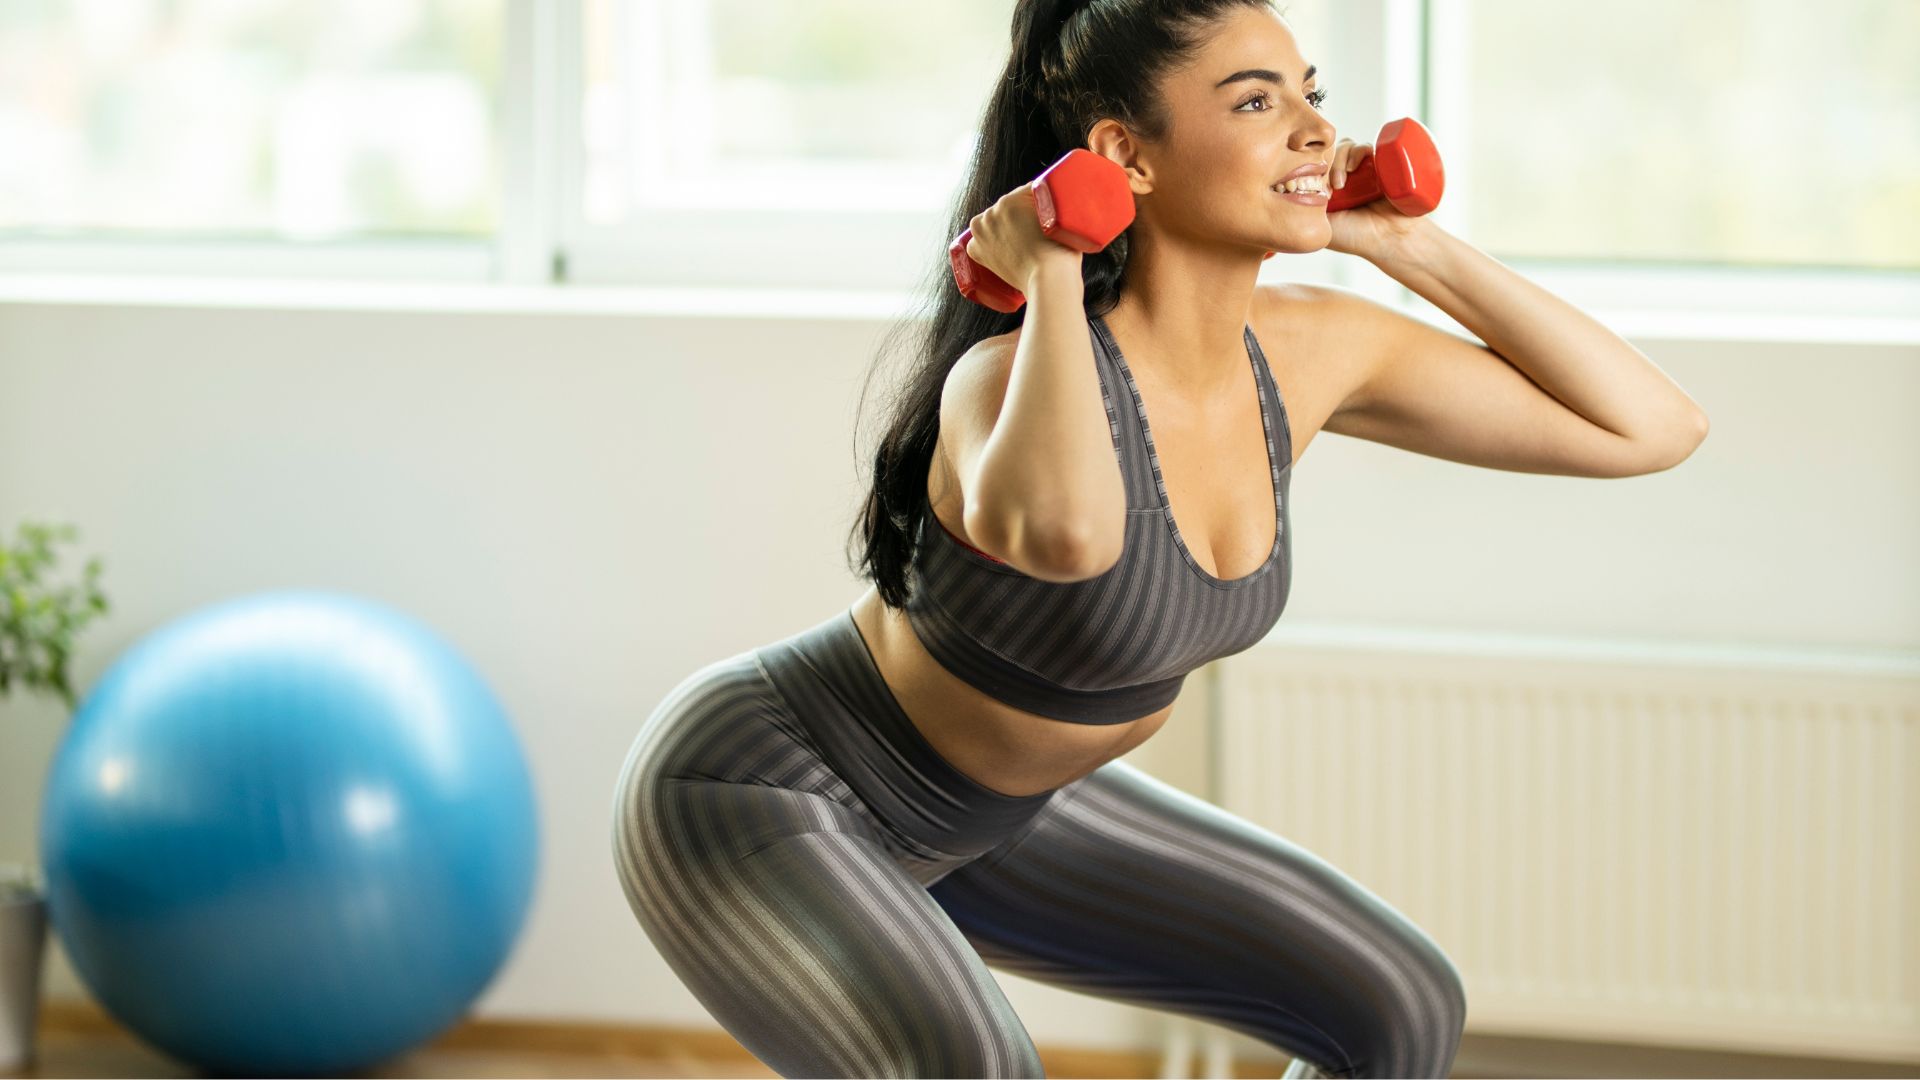 Fit woman doing squats with dumbbells at home